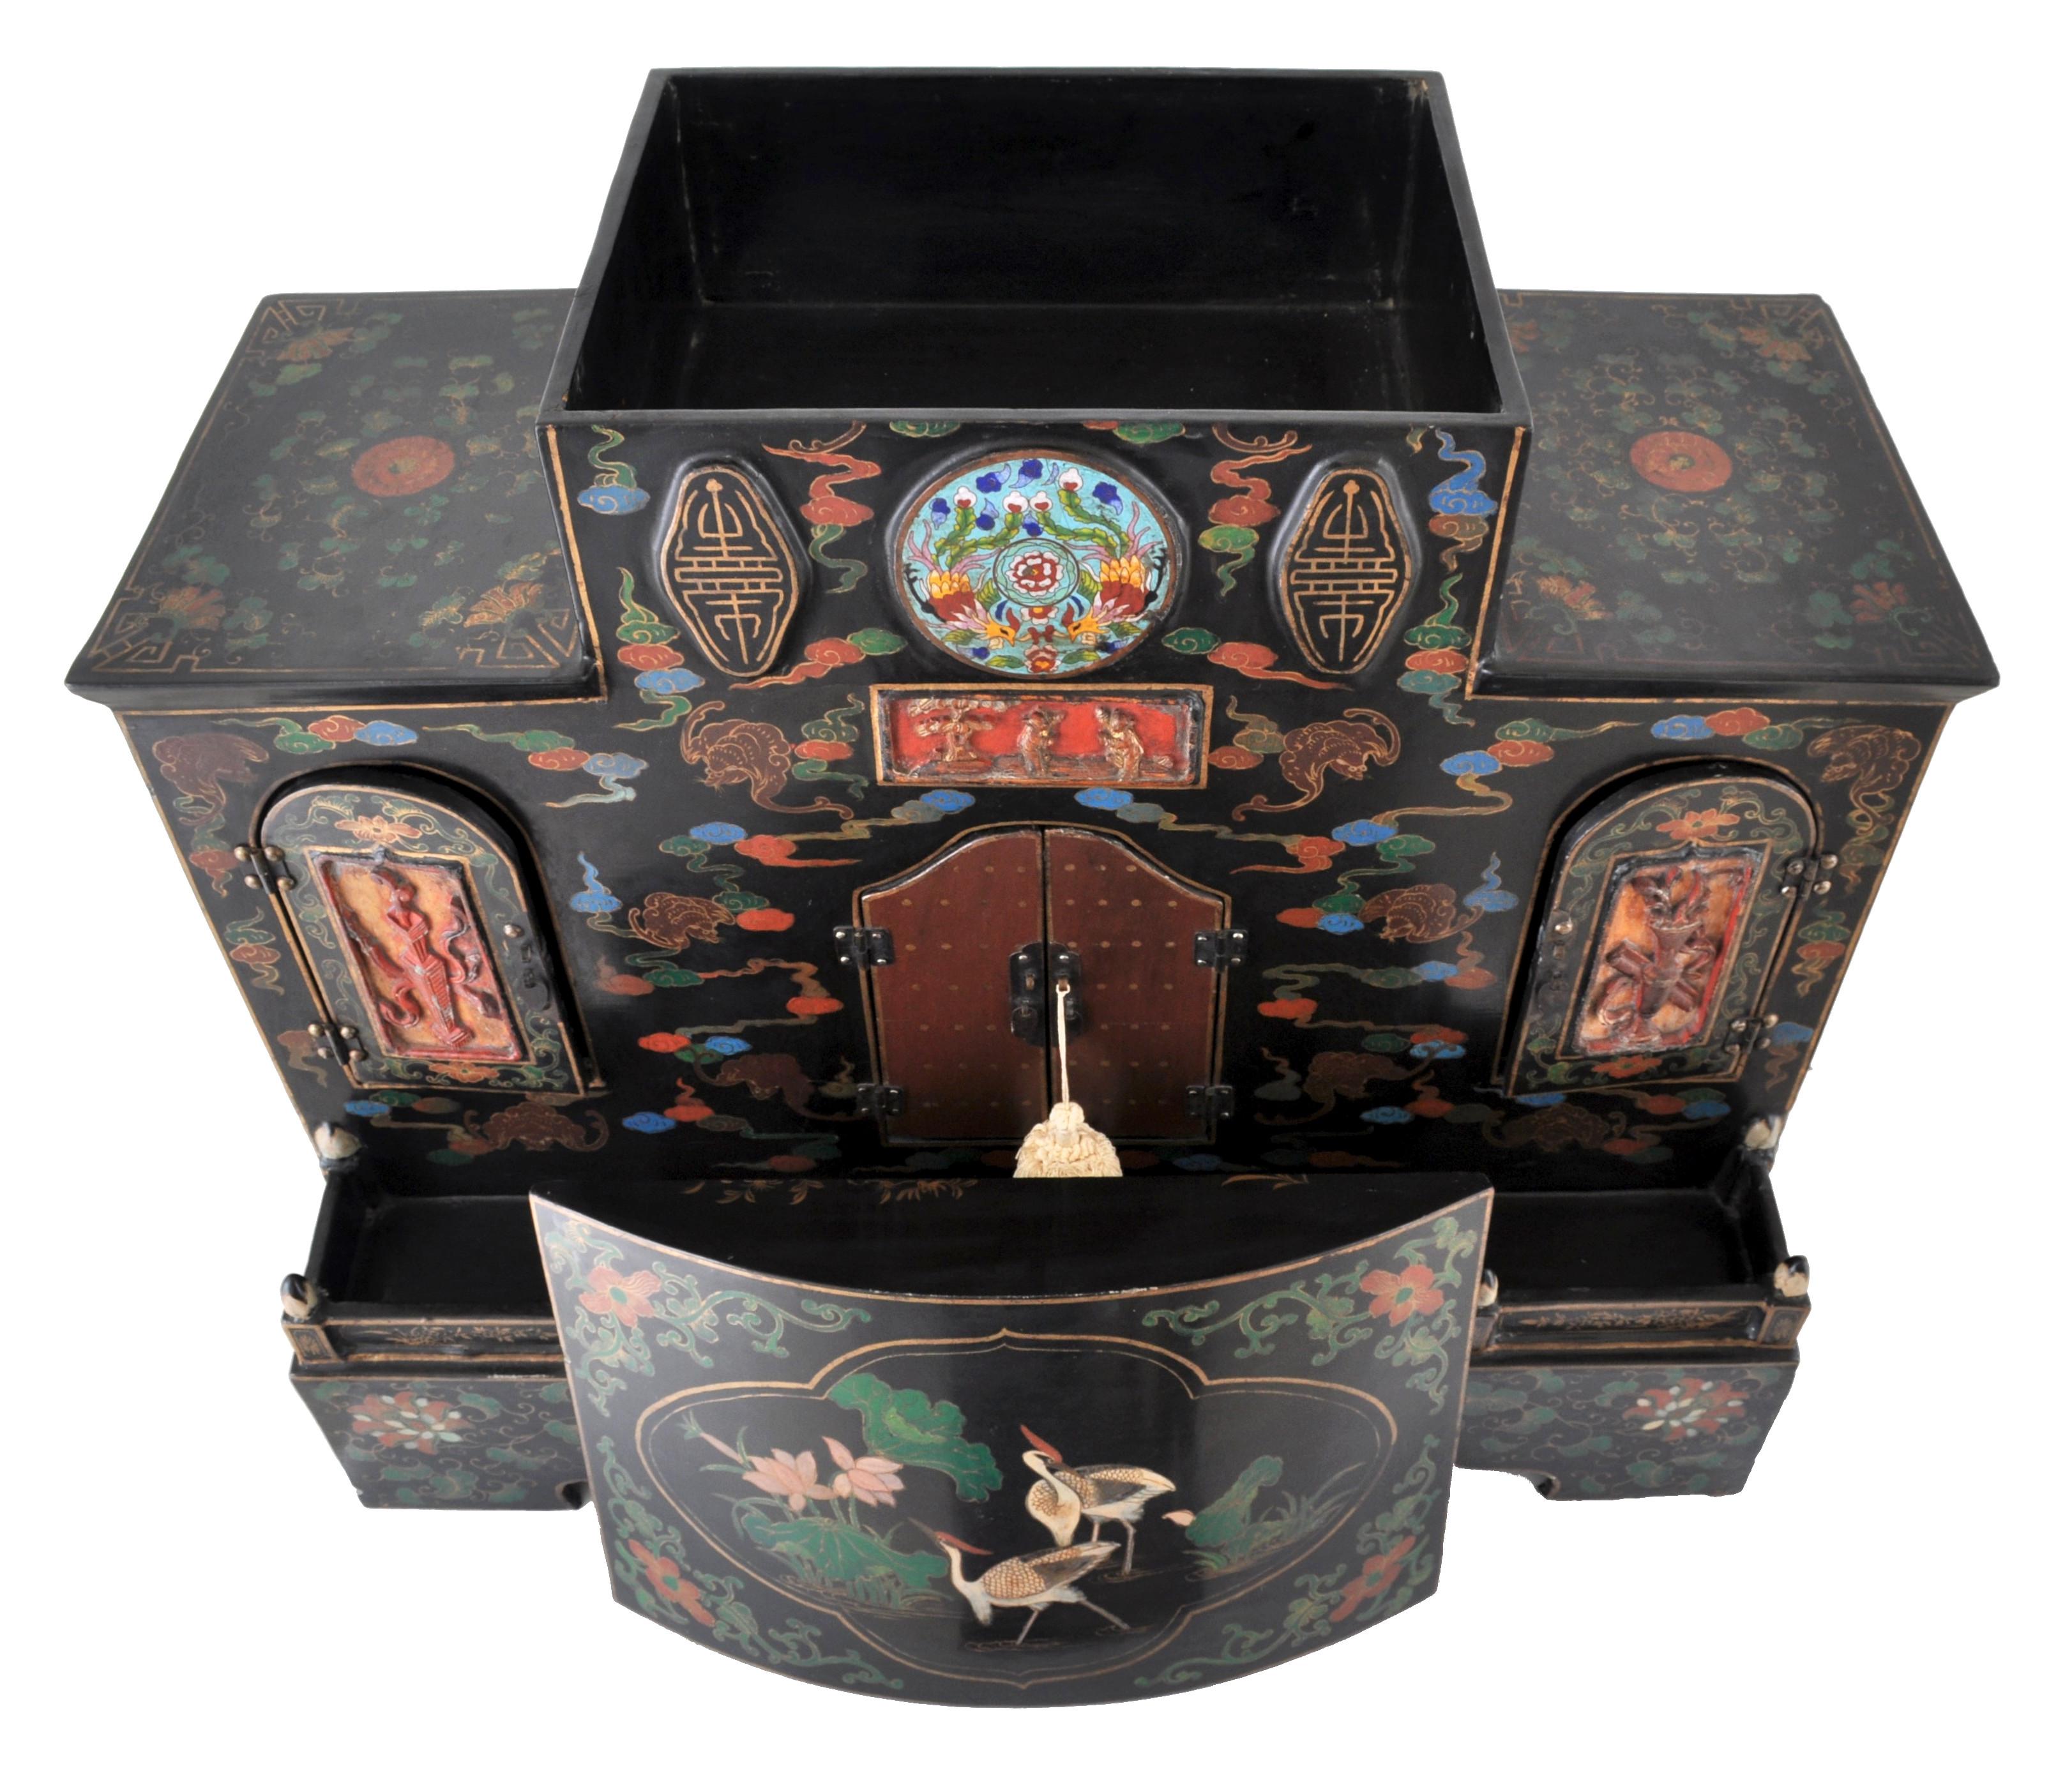 Early 20th Century Antique Chinese Qing Dynasty Lacquer Cloisonne Buddhistic Shrine/Cabinet